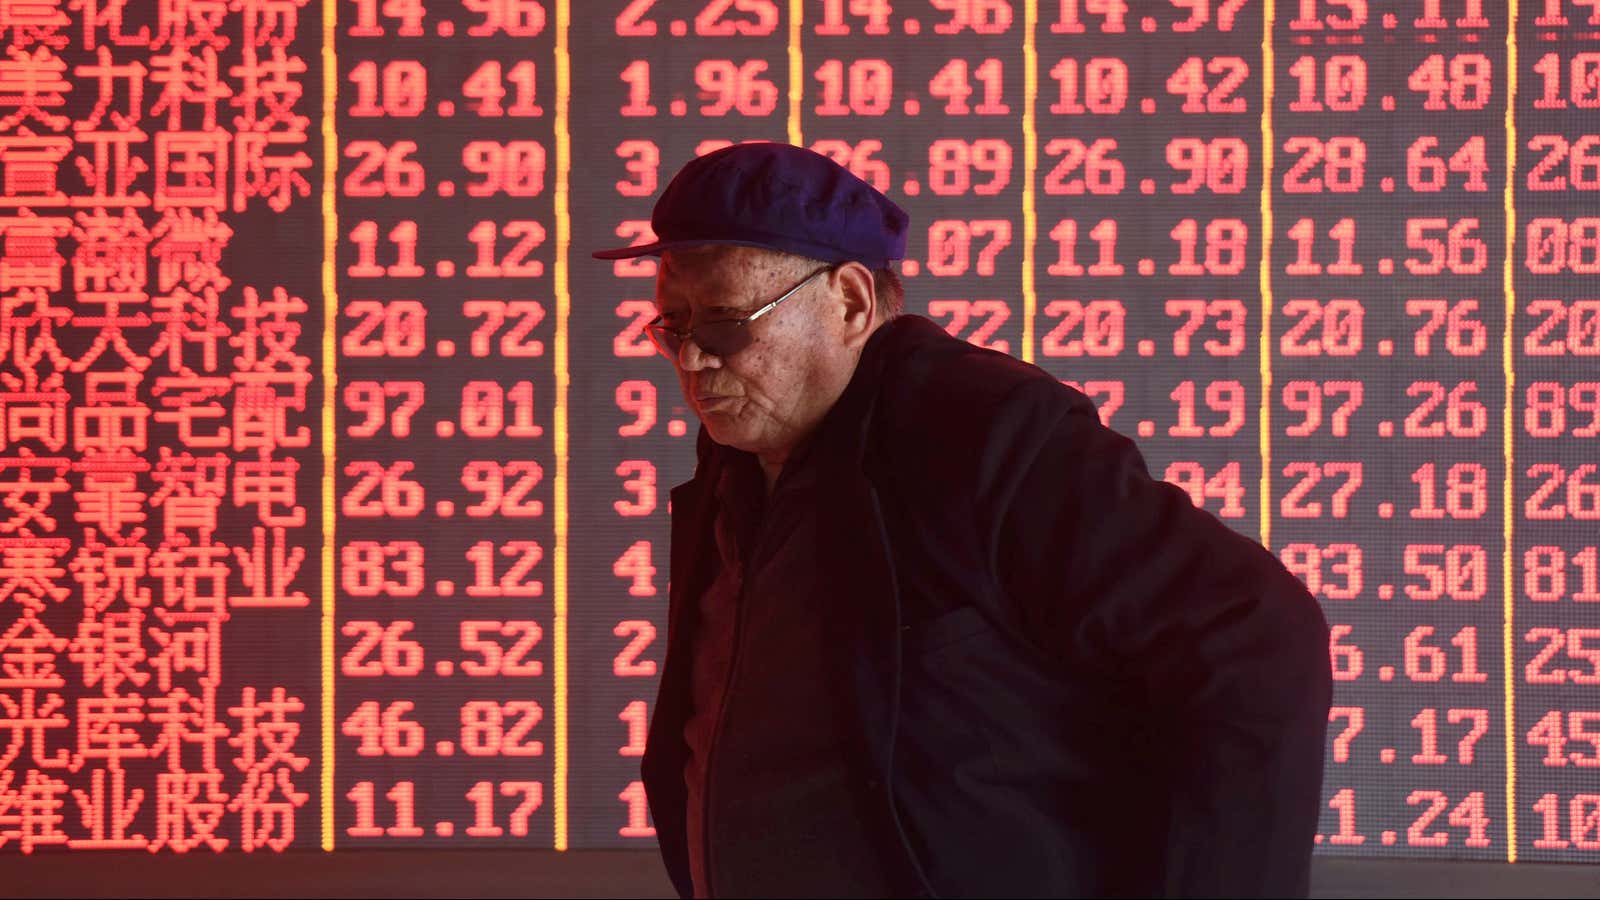 A man stands in front of an electronic board displaying stock information at a brokerage firm in Hangzhou, Zhejiang province, China April 1, 2019. Picture…